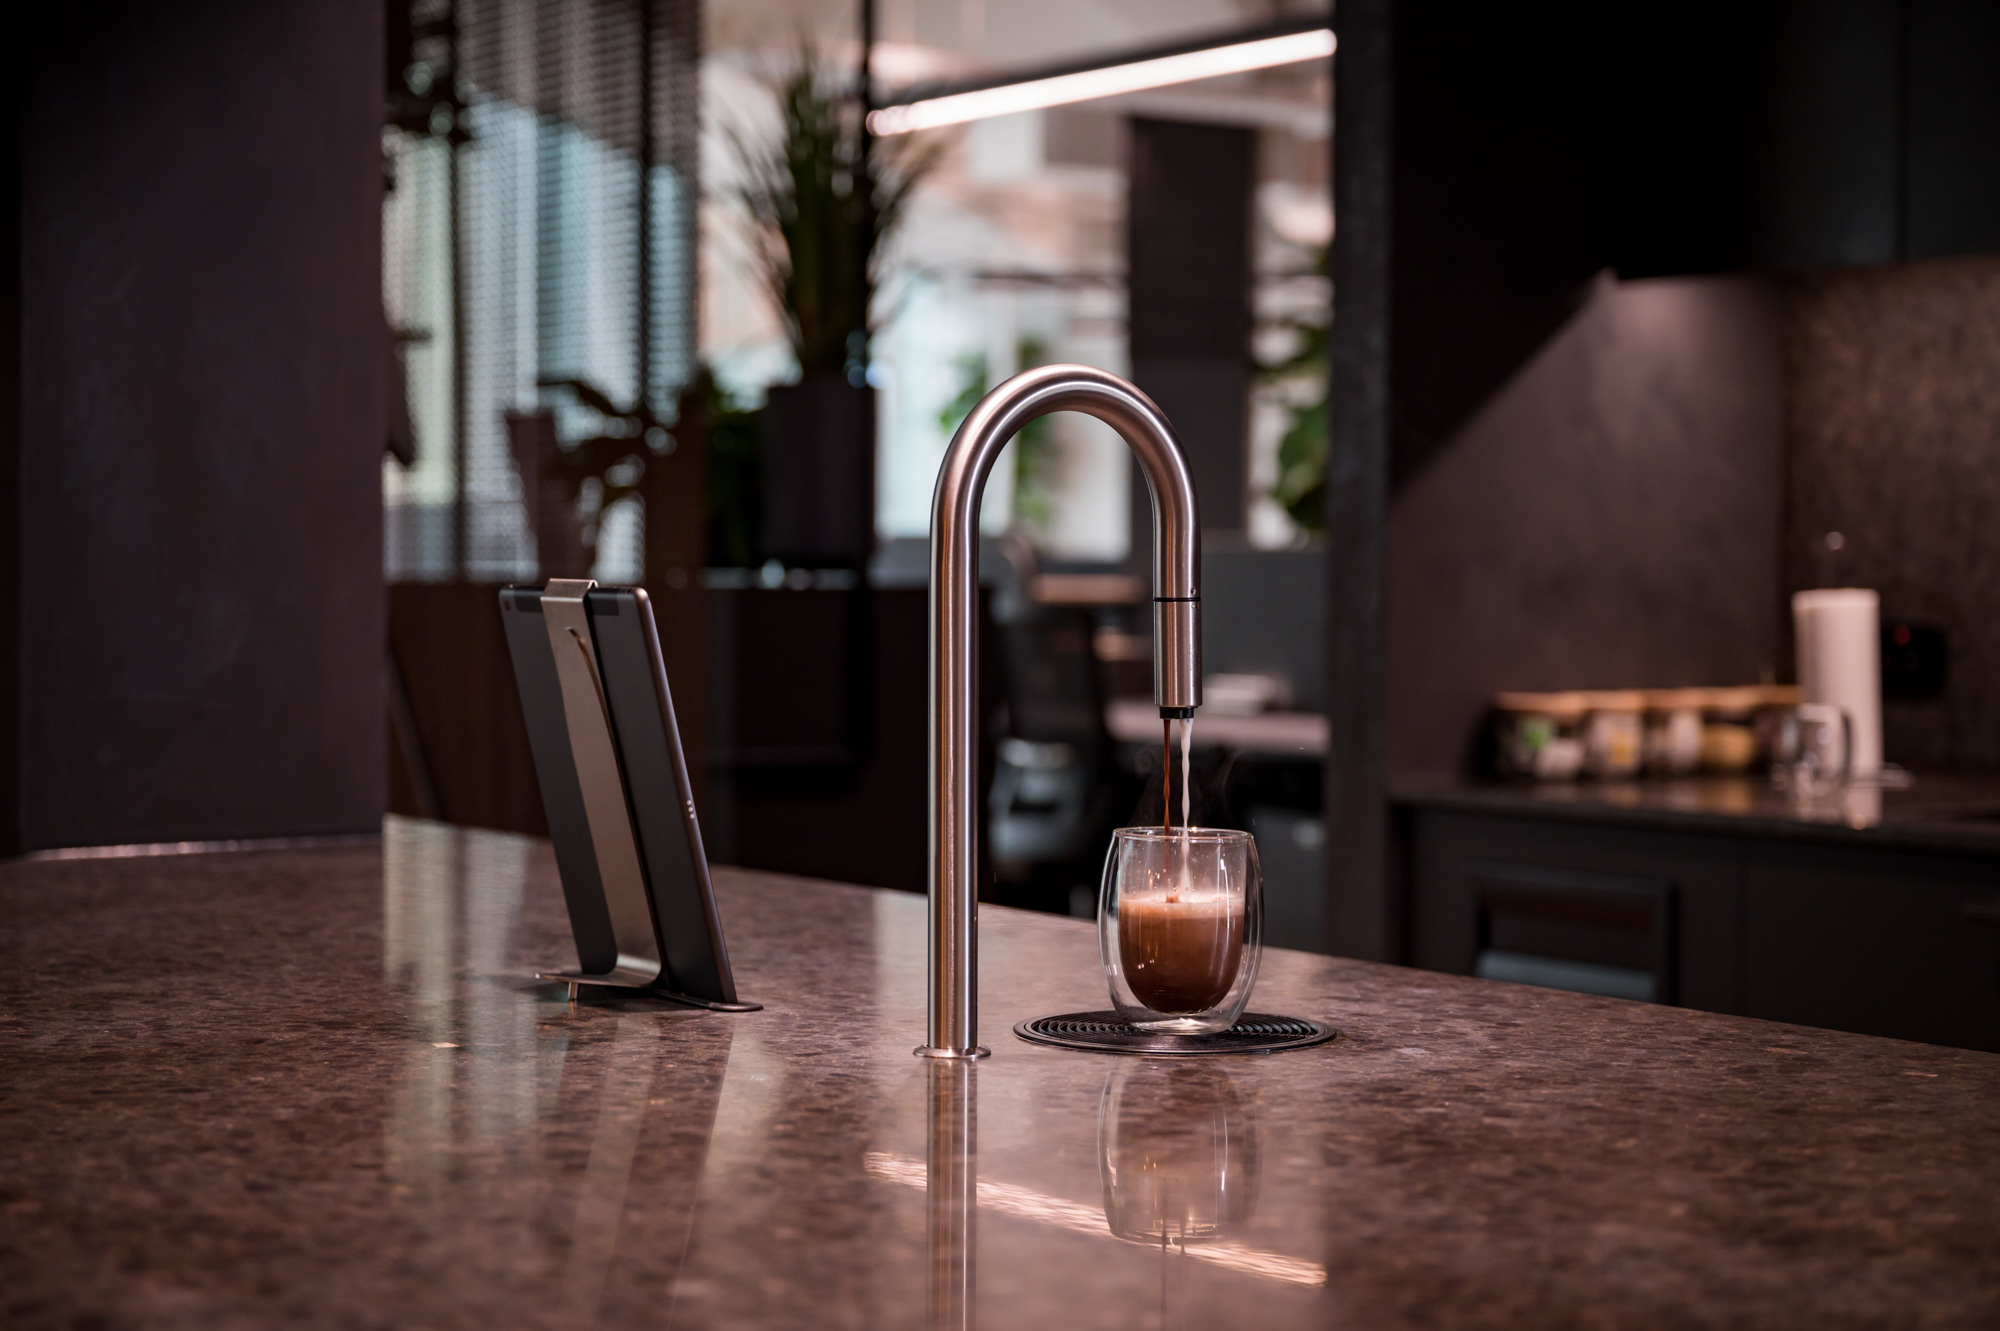 Coffee being poured using the TopBrewer installed at Fern co-working space in Perth